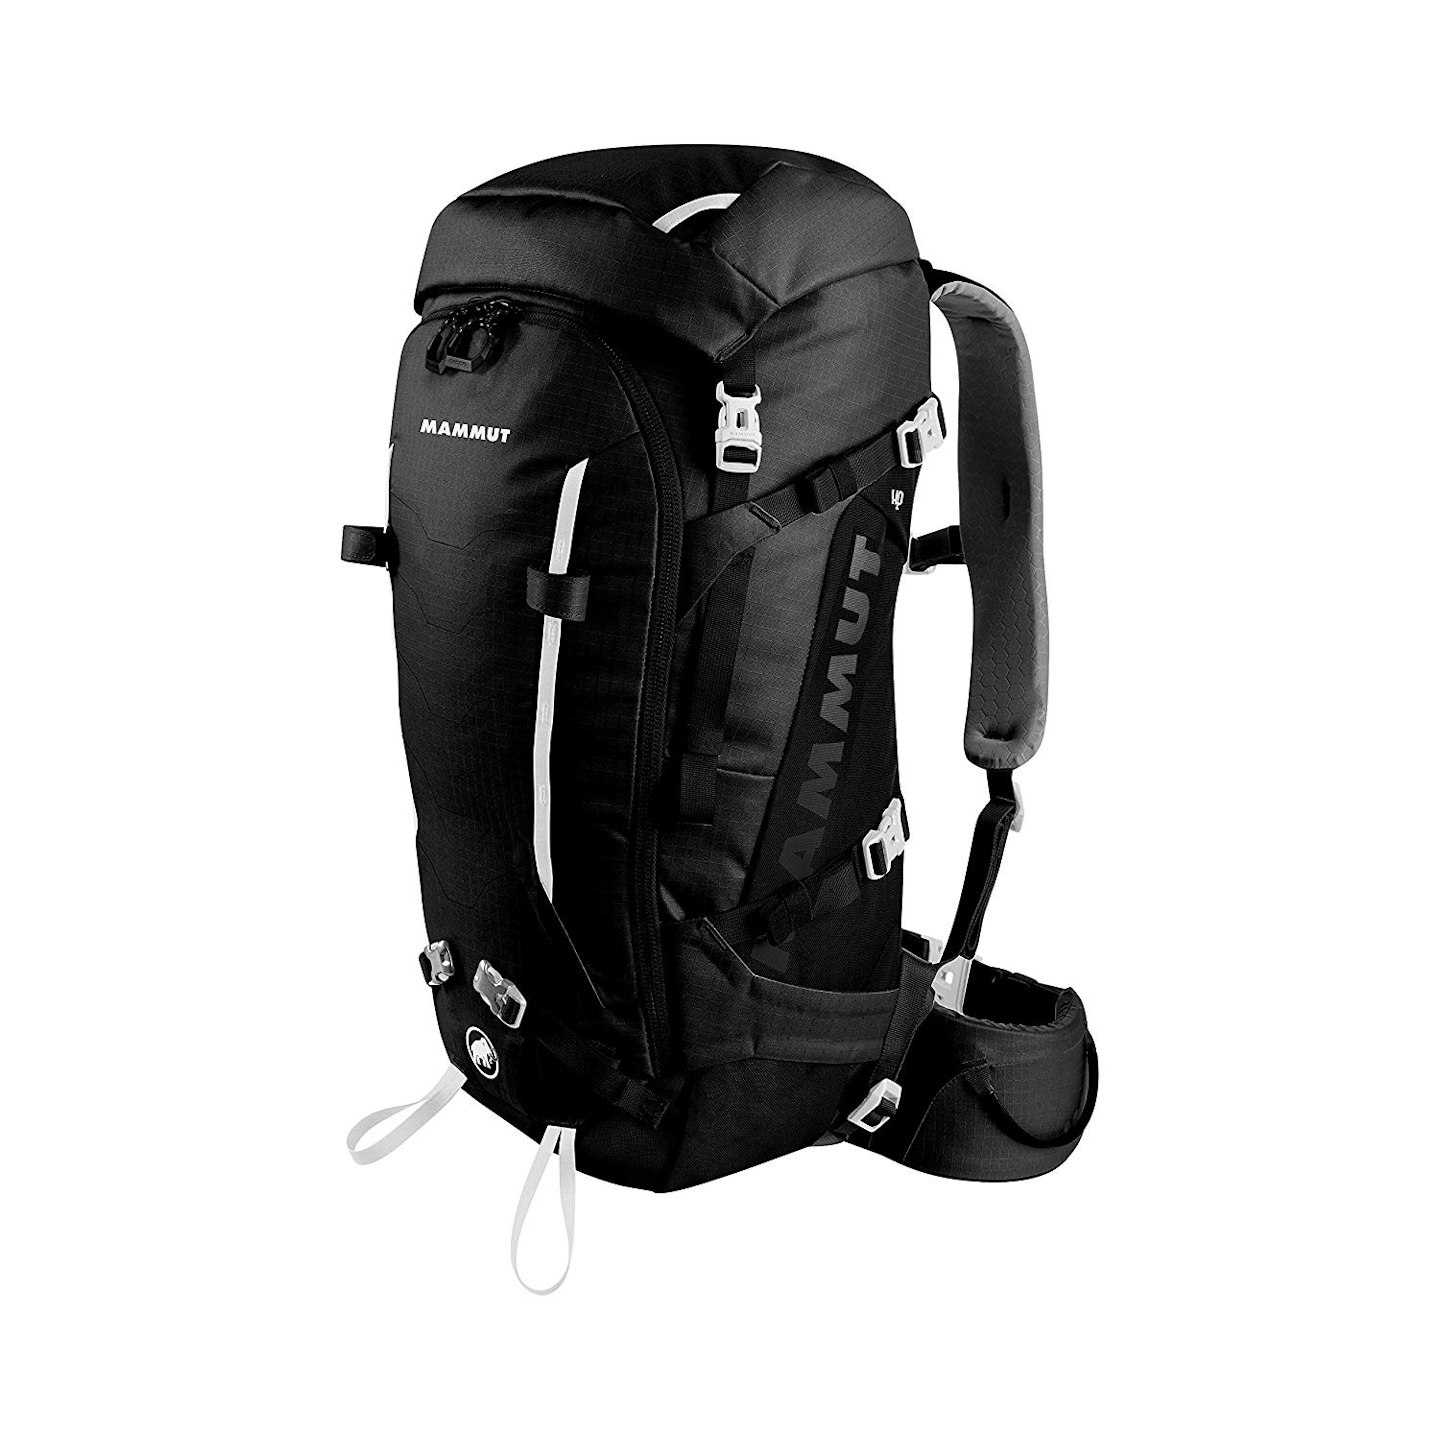 Mammut Mountaineering Backpack Trion Spine 50, £263.12 